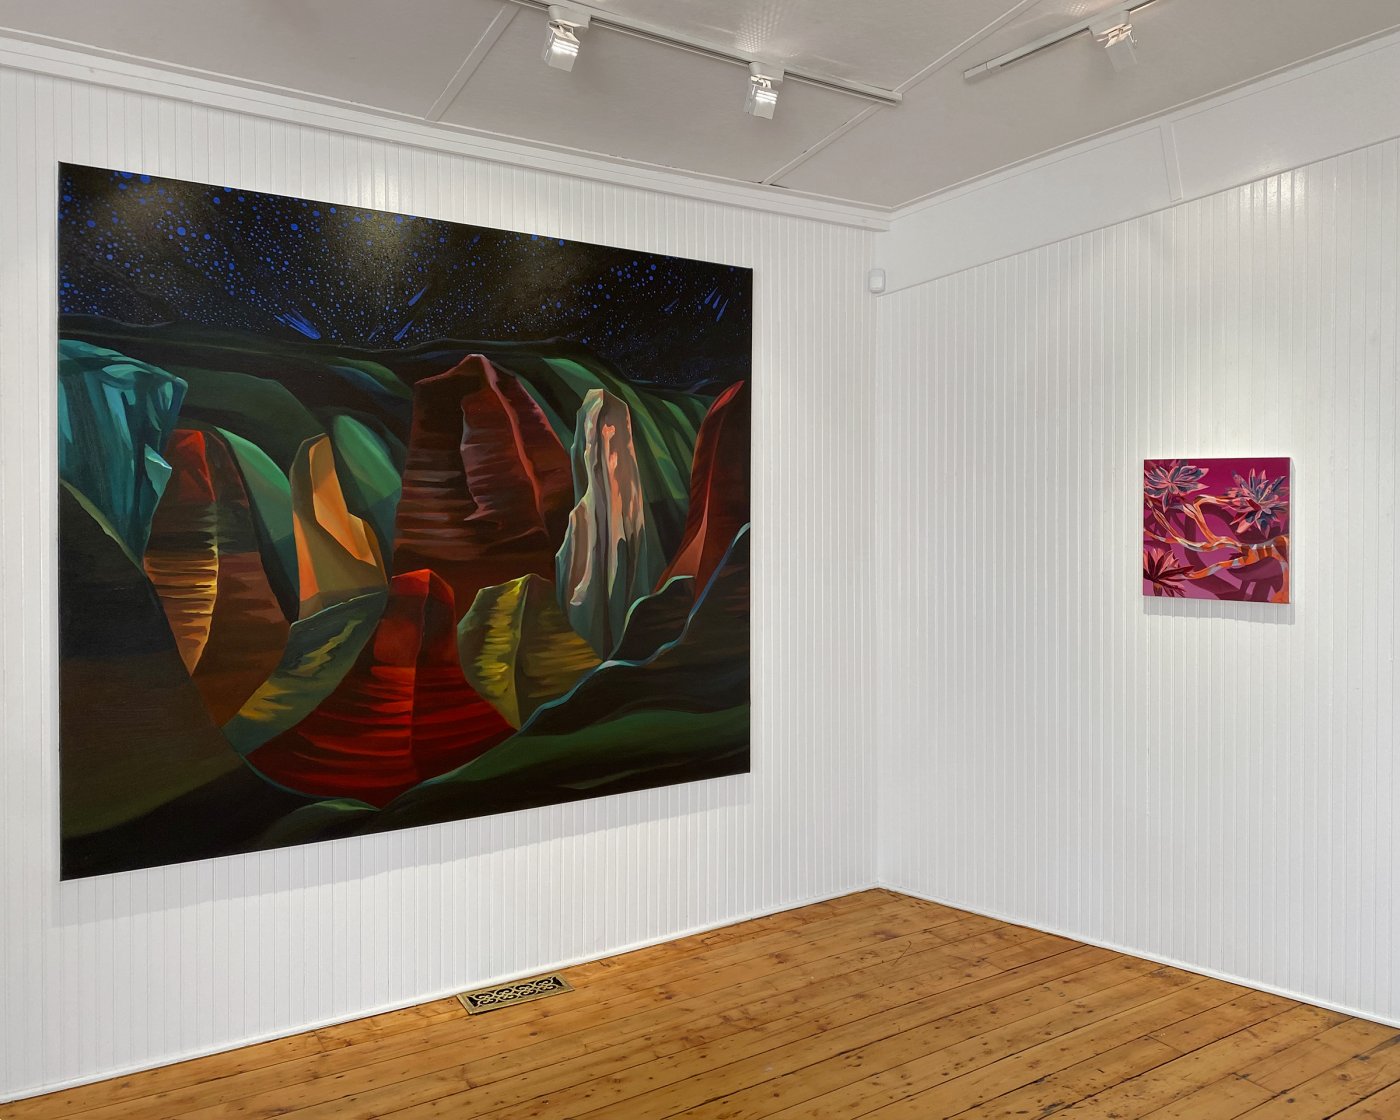 Installation image for Dimensions, at Hollis Taggart